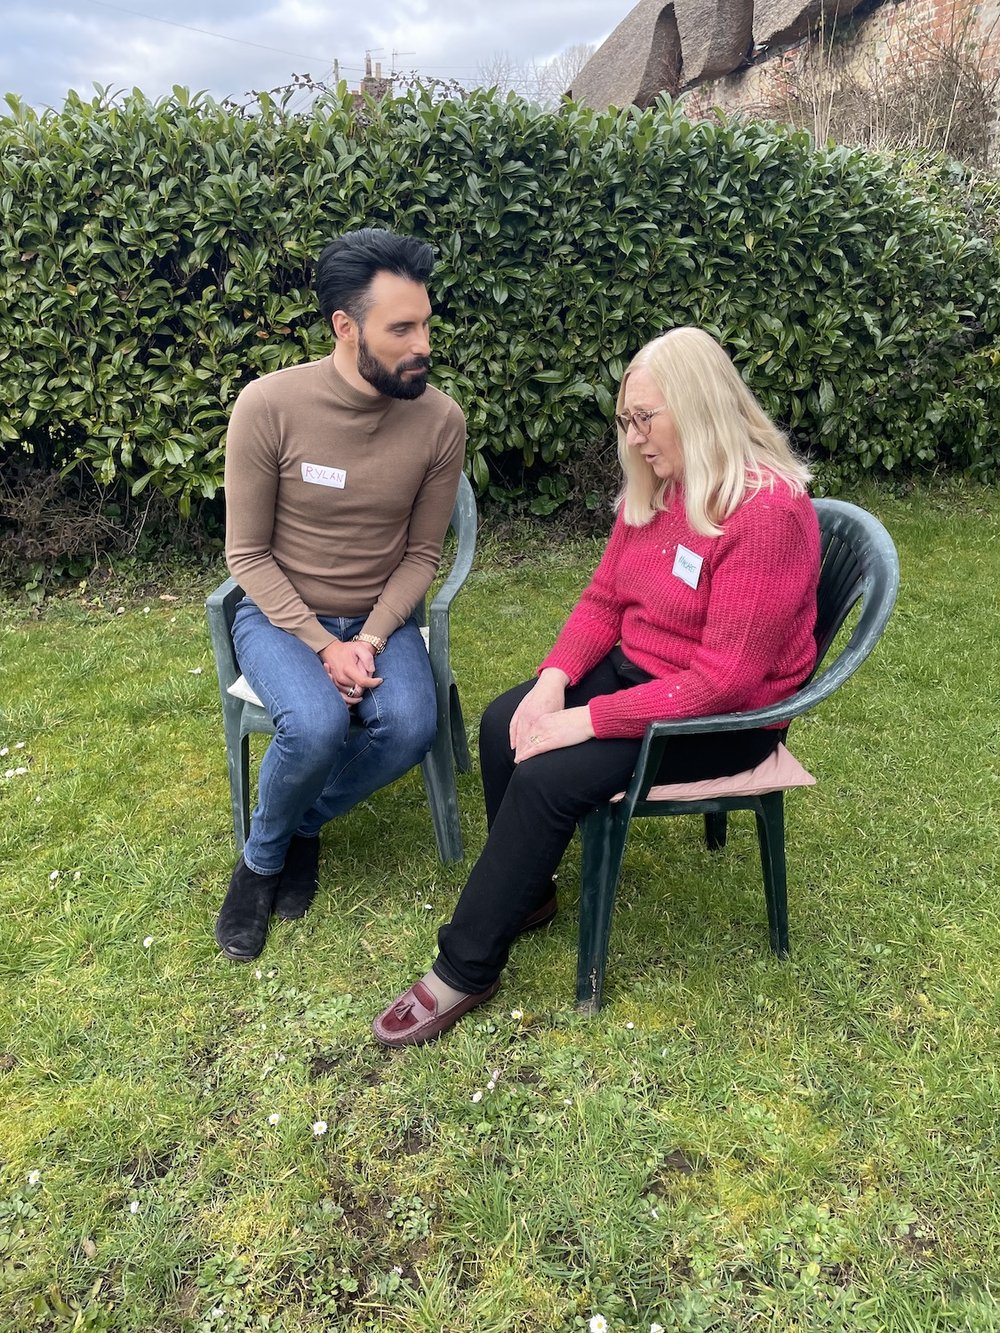 Rylan chats with Margaret in the garden